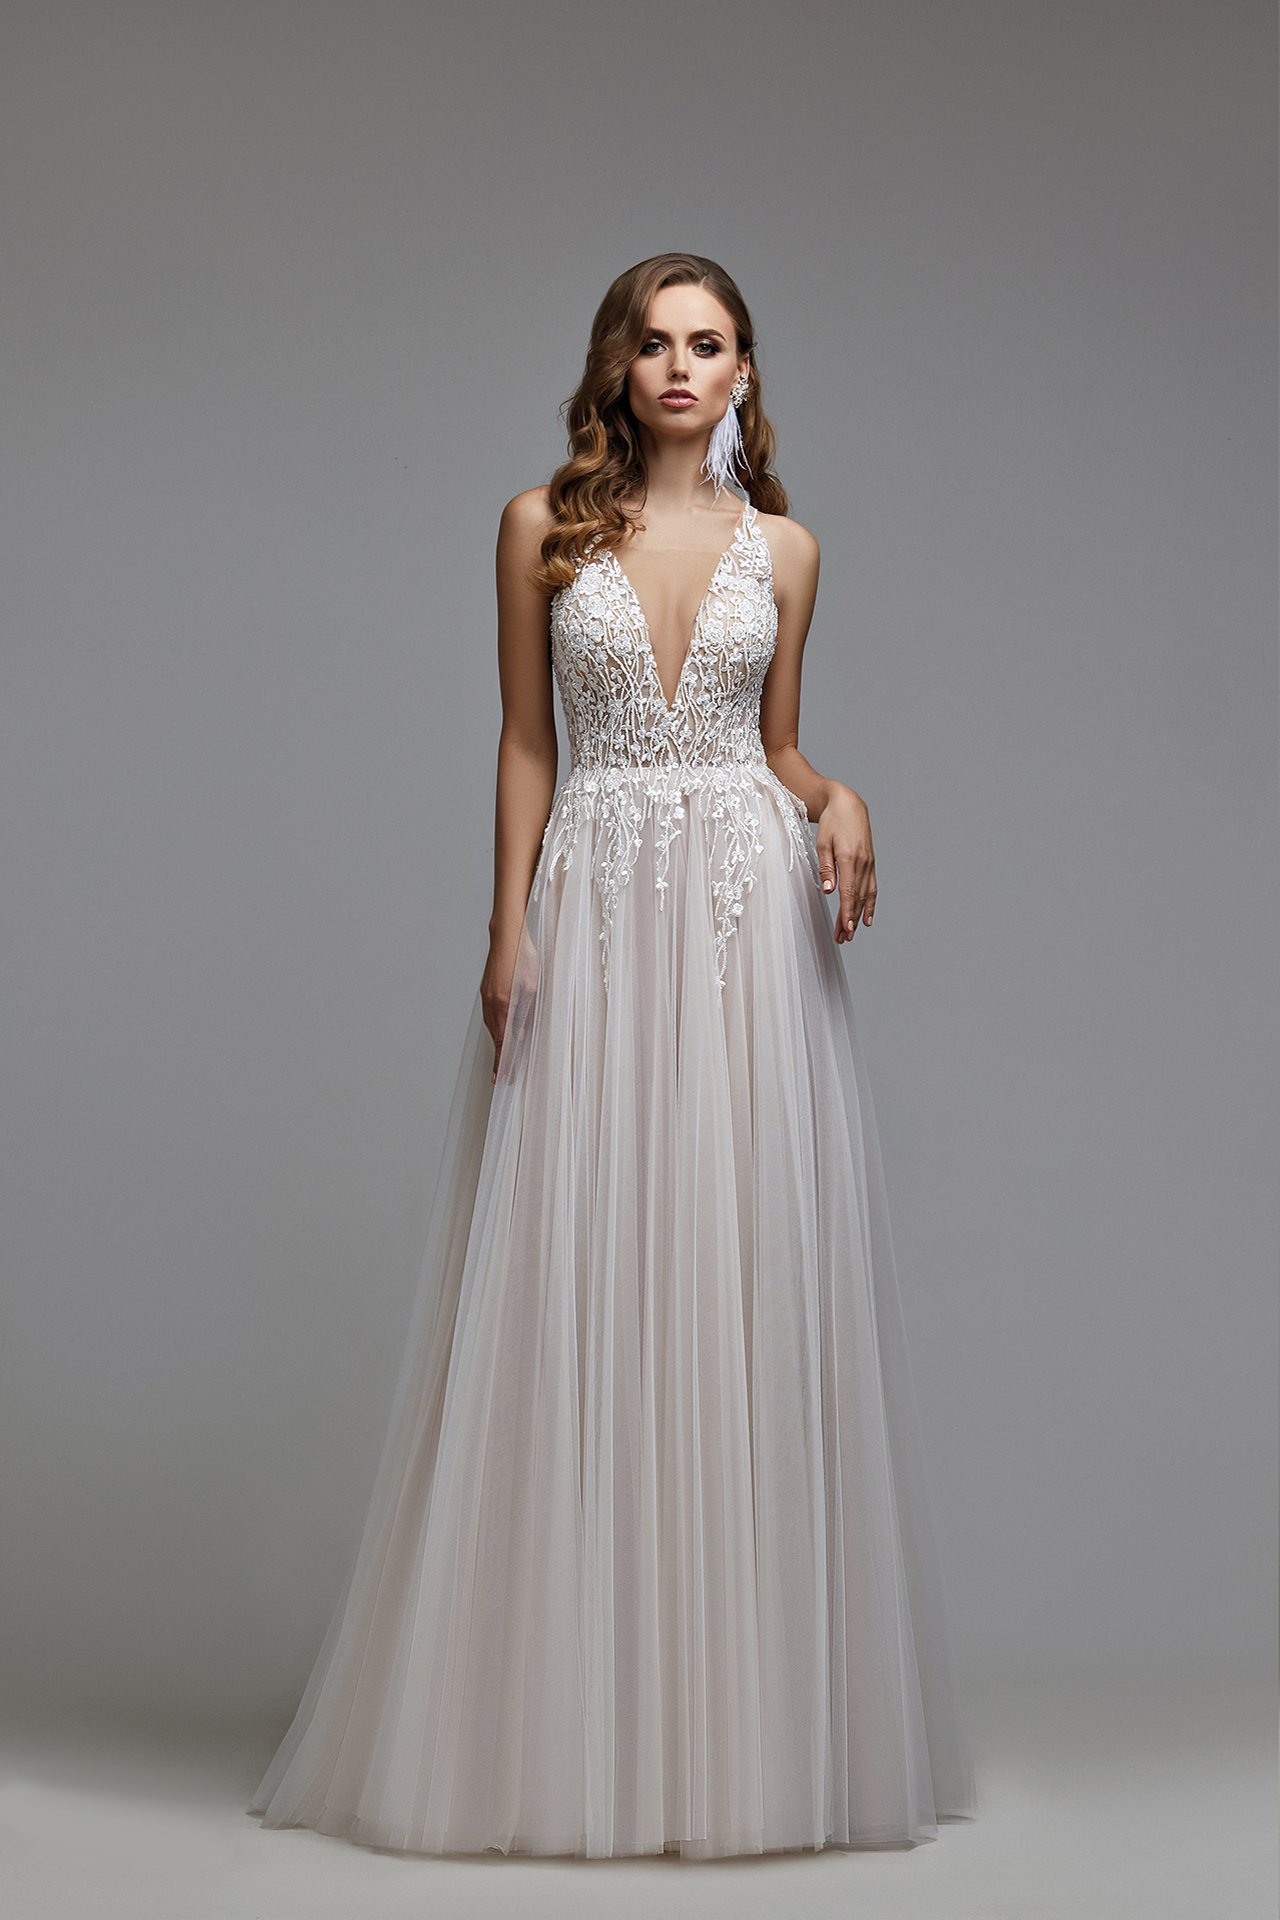 best wedding dress style for small bust